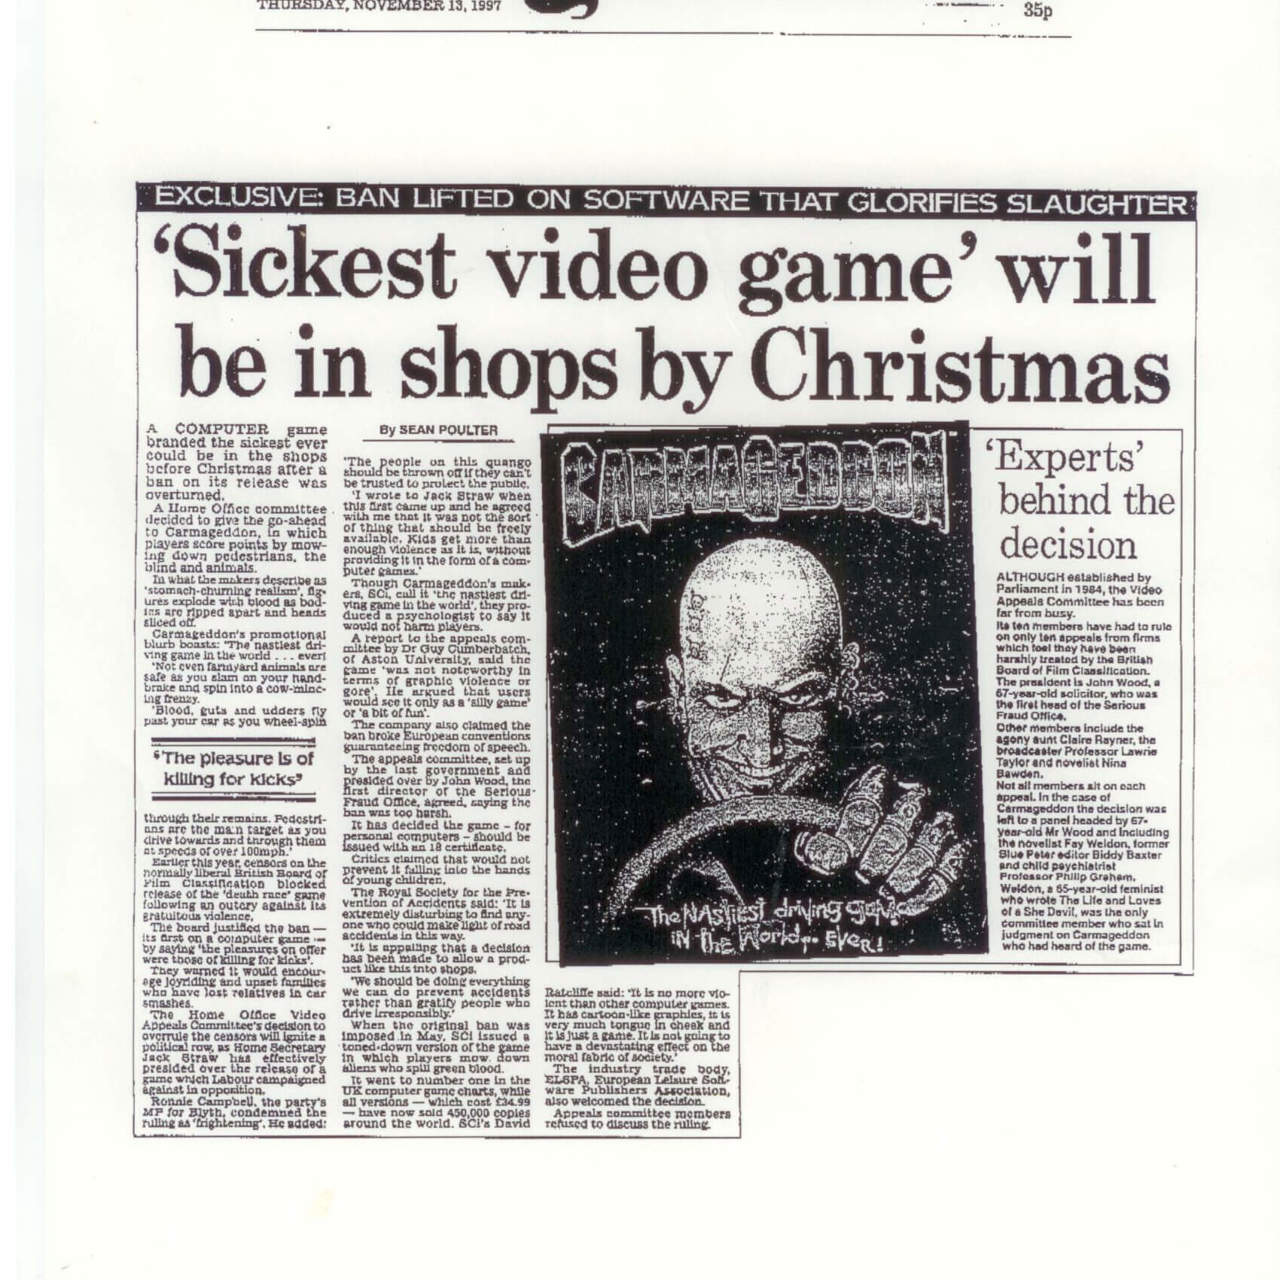 Image of a newspaper with the headline "Sickest video game" will be in shops by Christmas